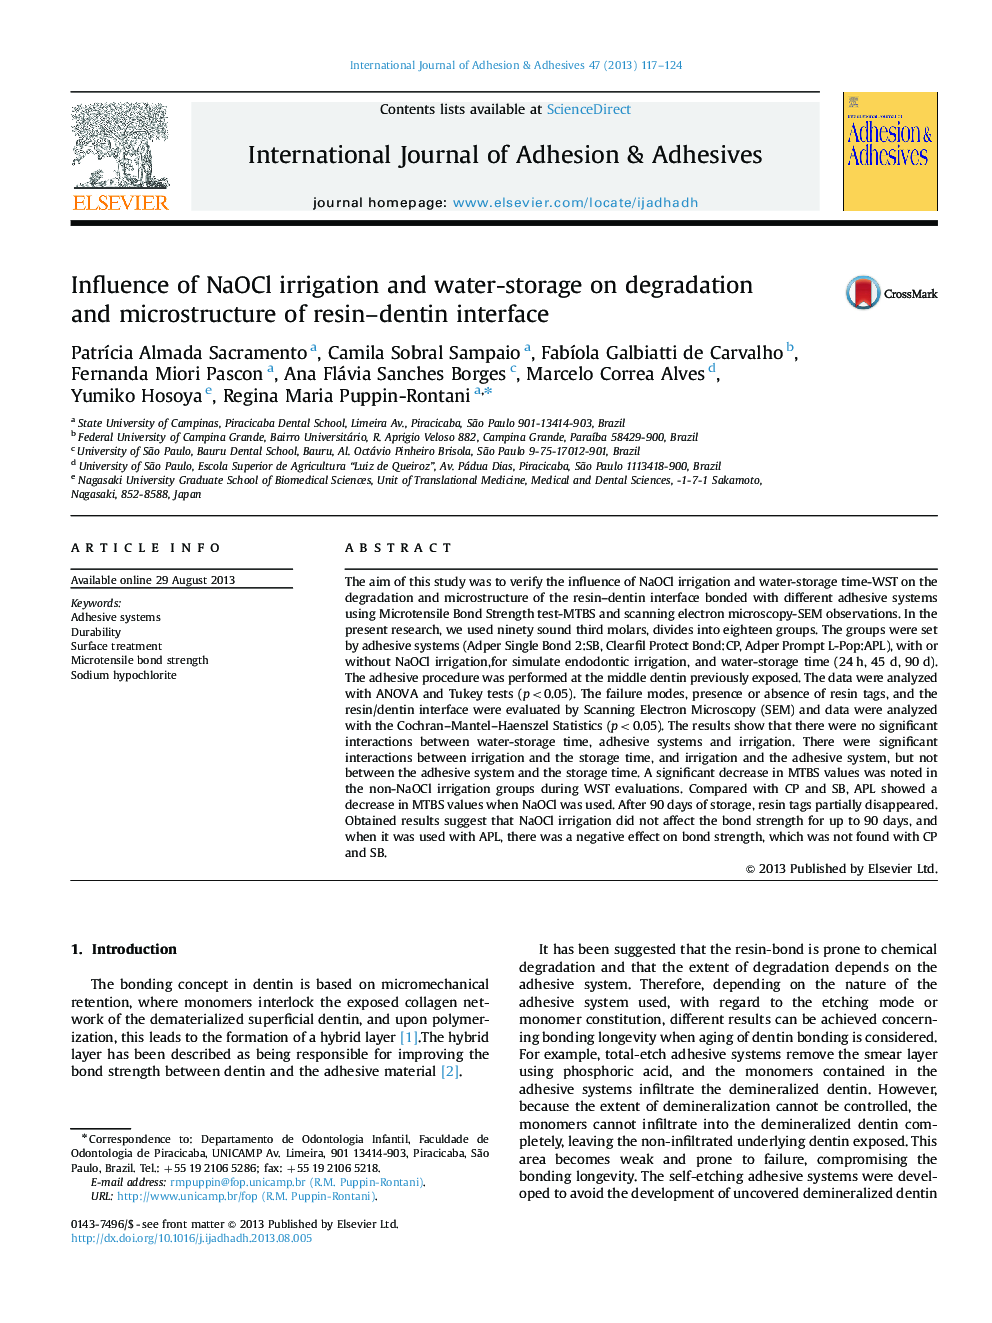 Influence of NaOCl irrigation and water-storage on degradation and microstructure of resin–dentin interface